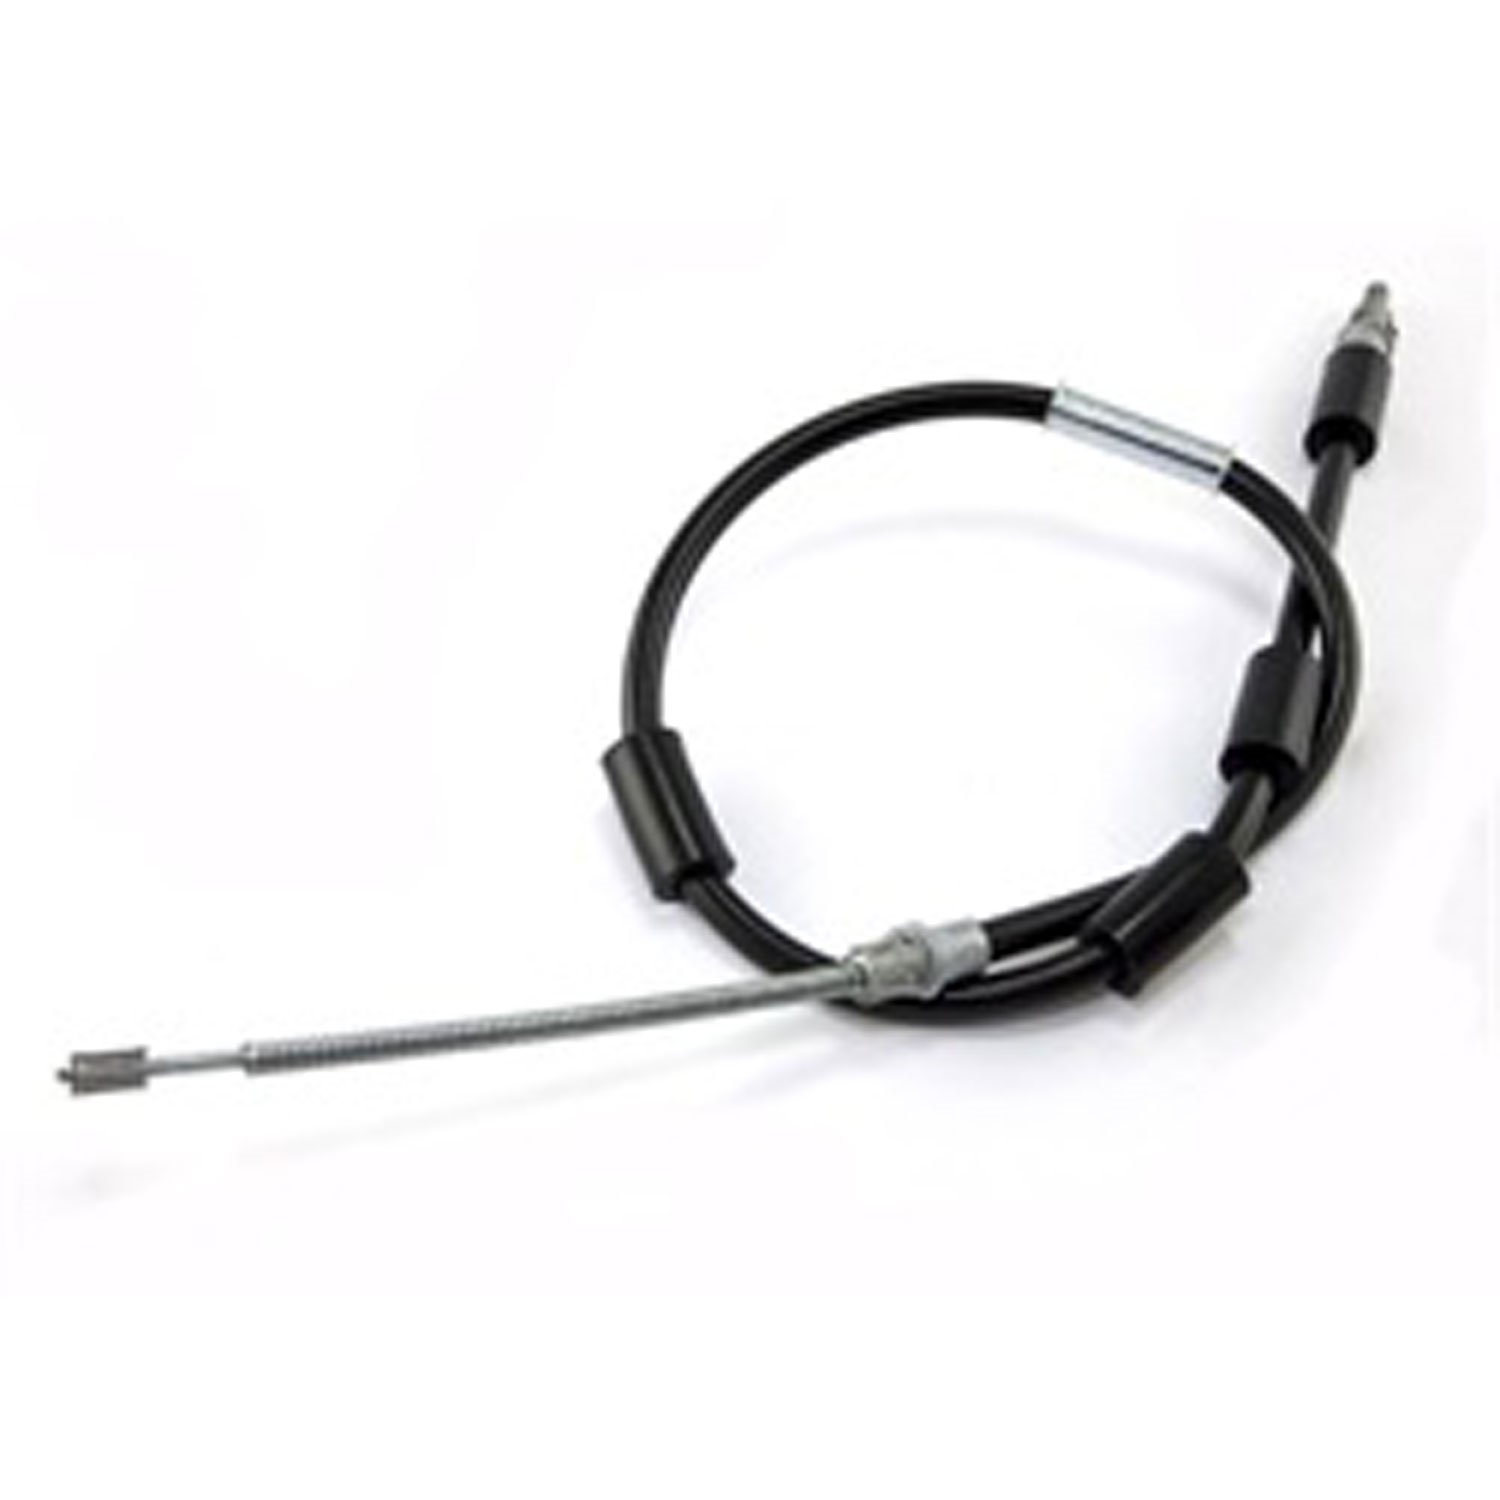 Emergency Brake Cable Rear With Rear Drums Without ABS LH or RH 1997-2006 Wrangler With ABS 2003-2006 Wrangler